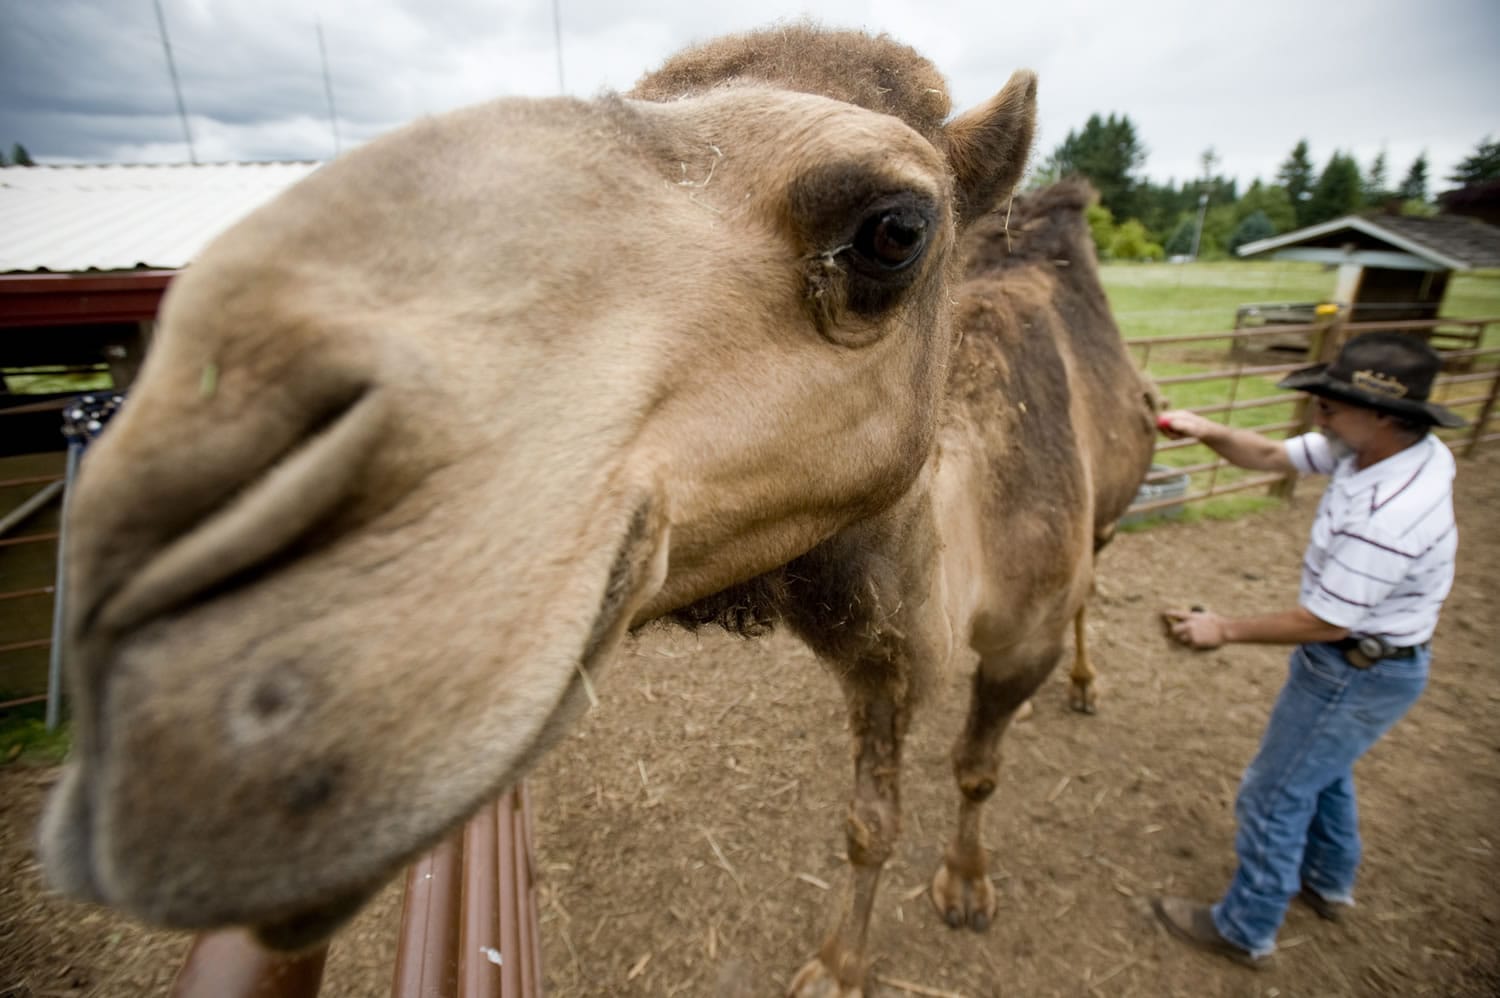 Curly the Camel is groomed by owner Jeff Siebert at his La Center area farm June 30, 2011.